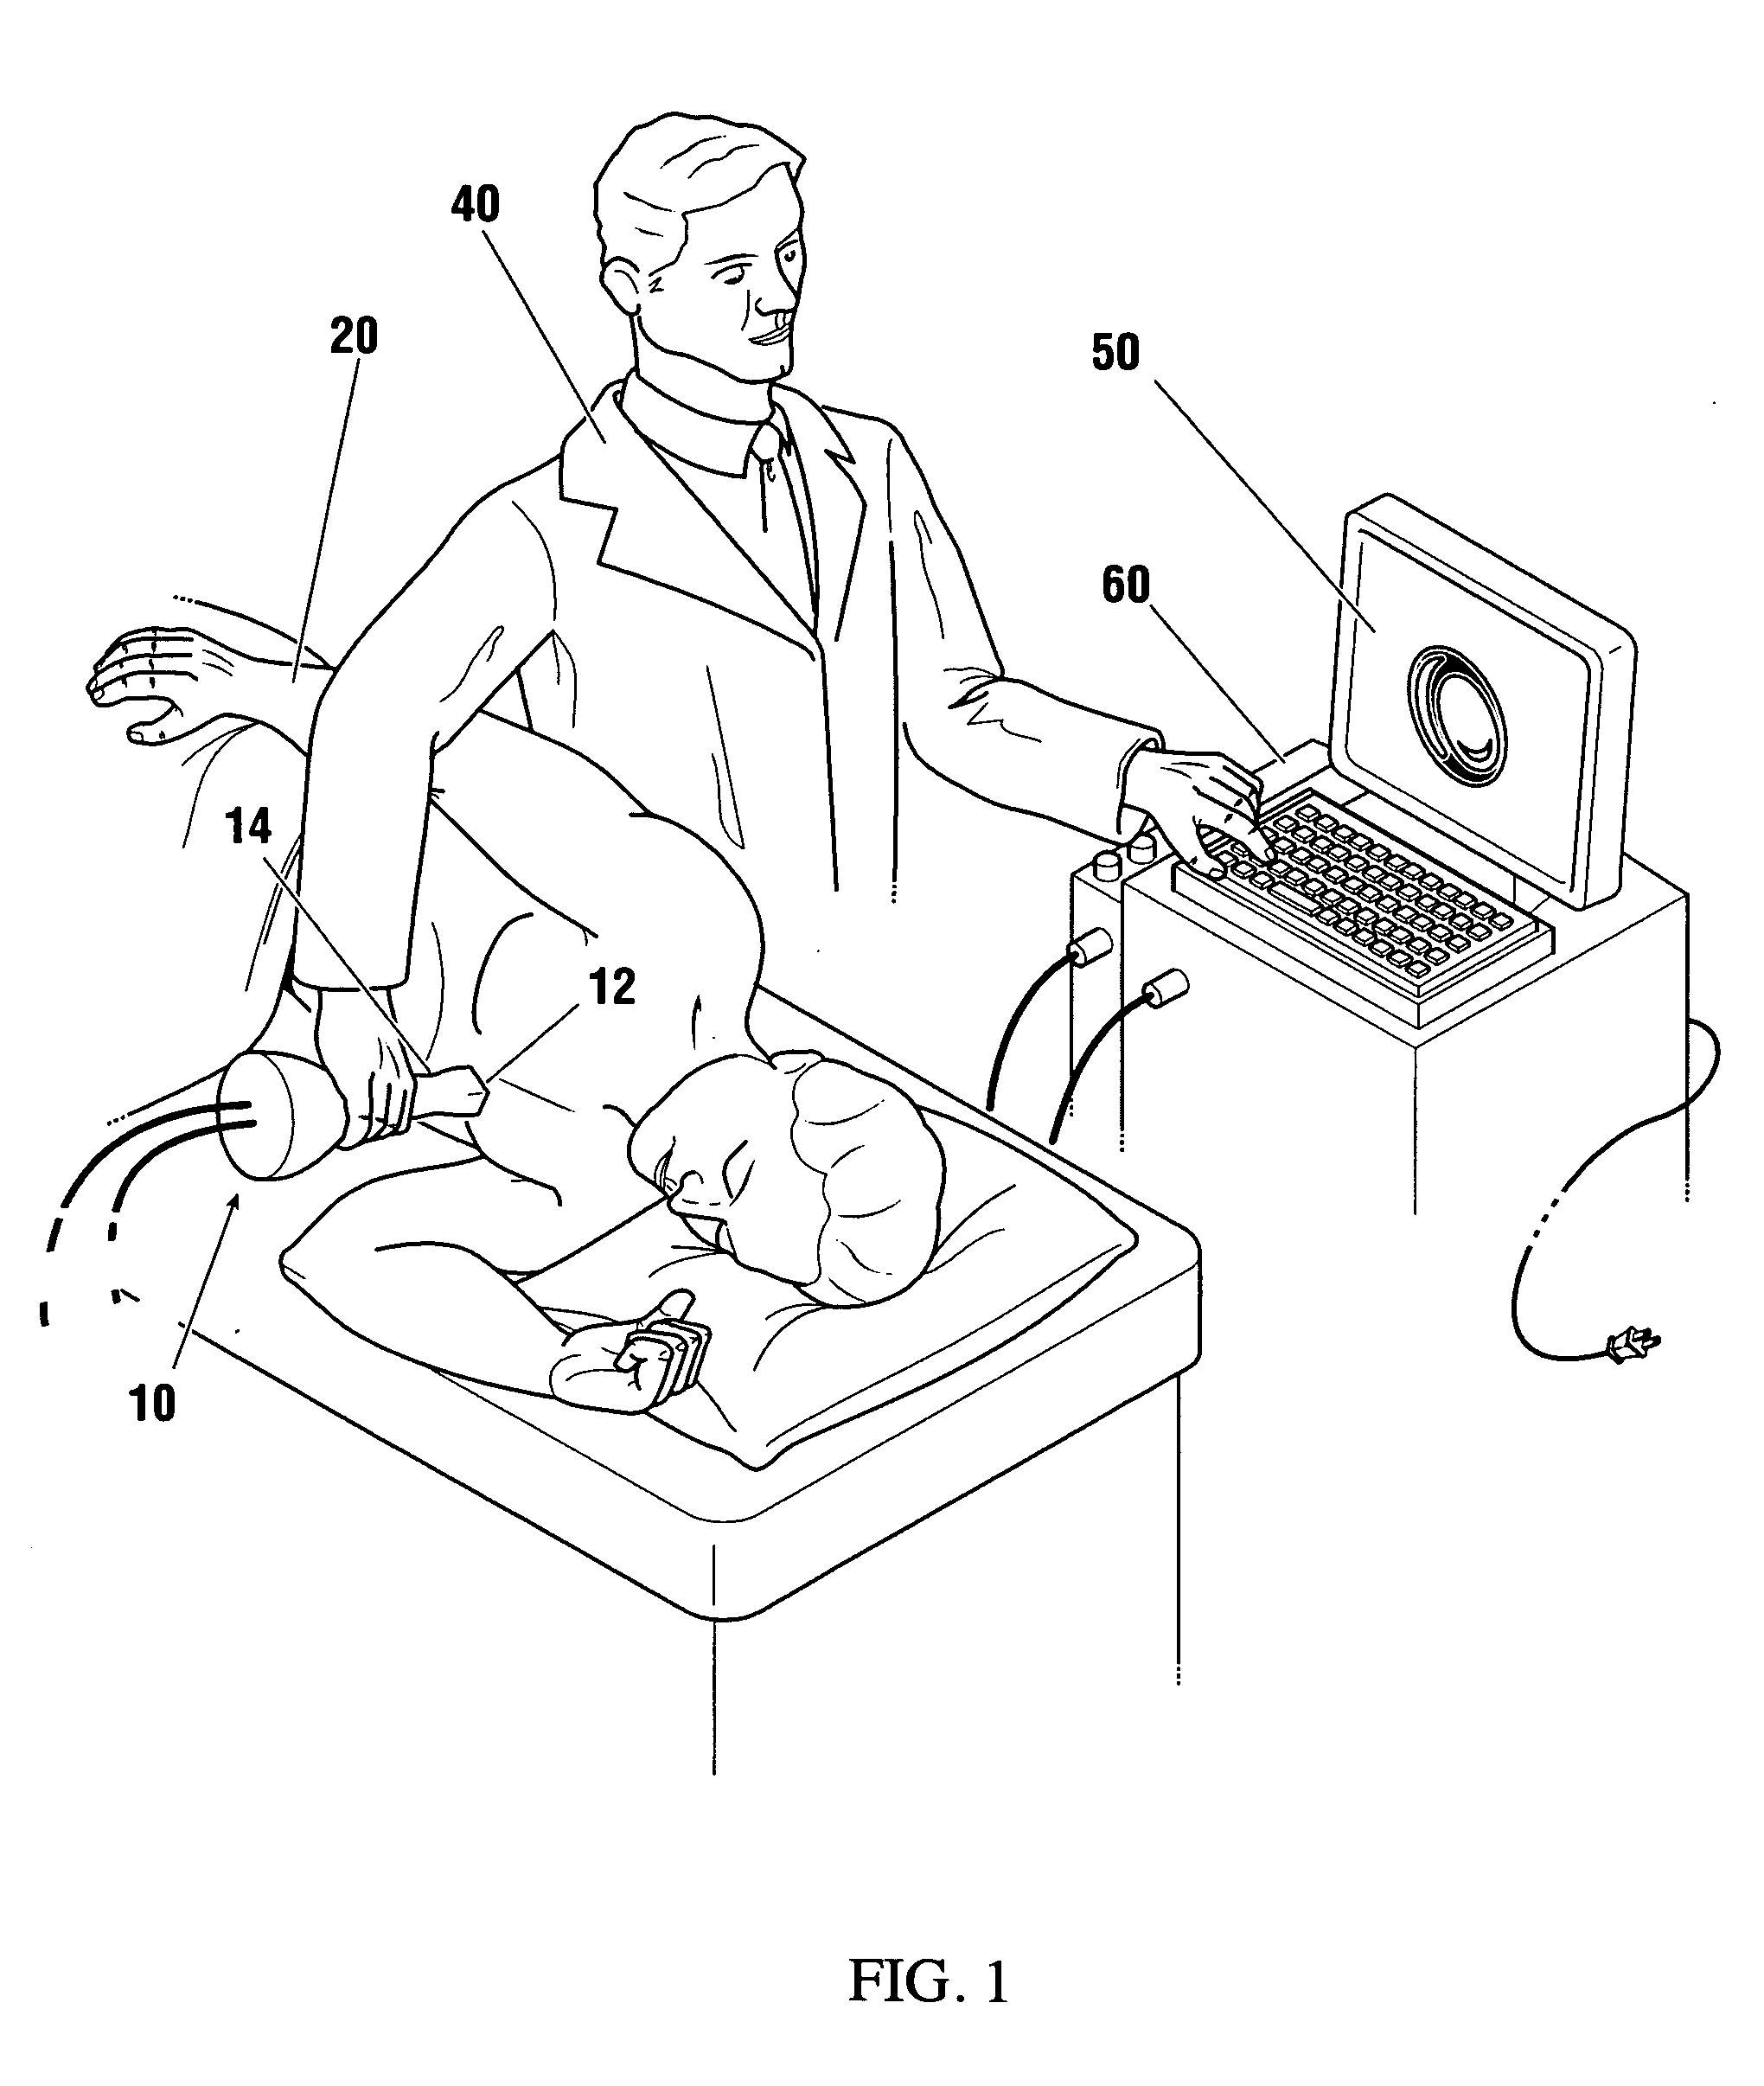 Hand-held imaging probe for treatment of states of low blood perfusion